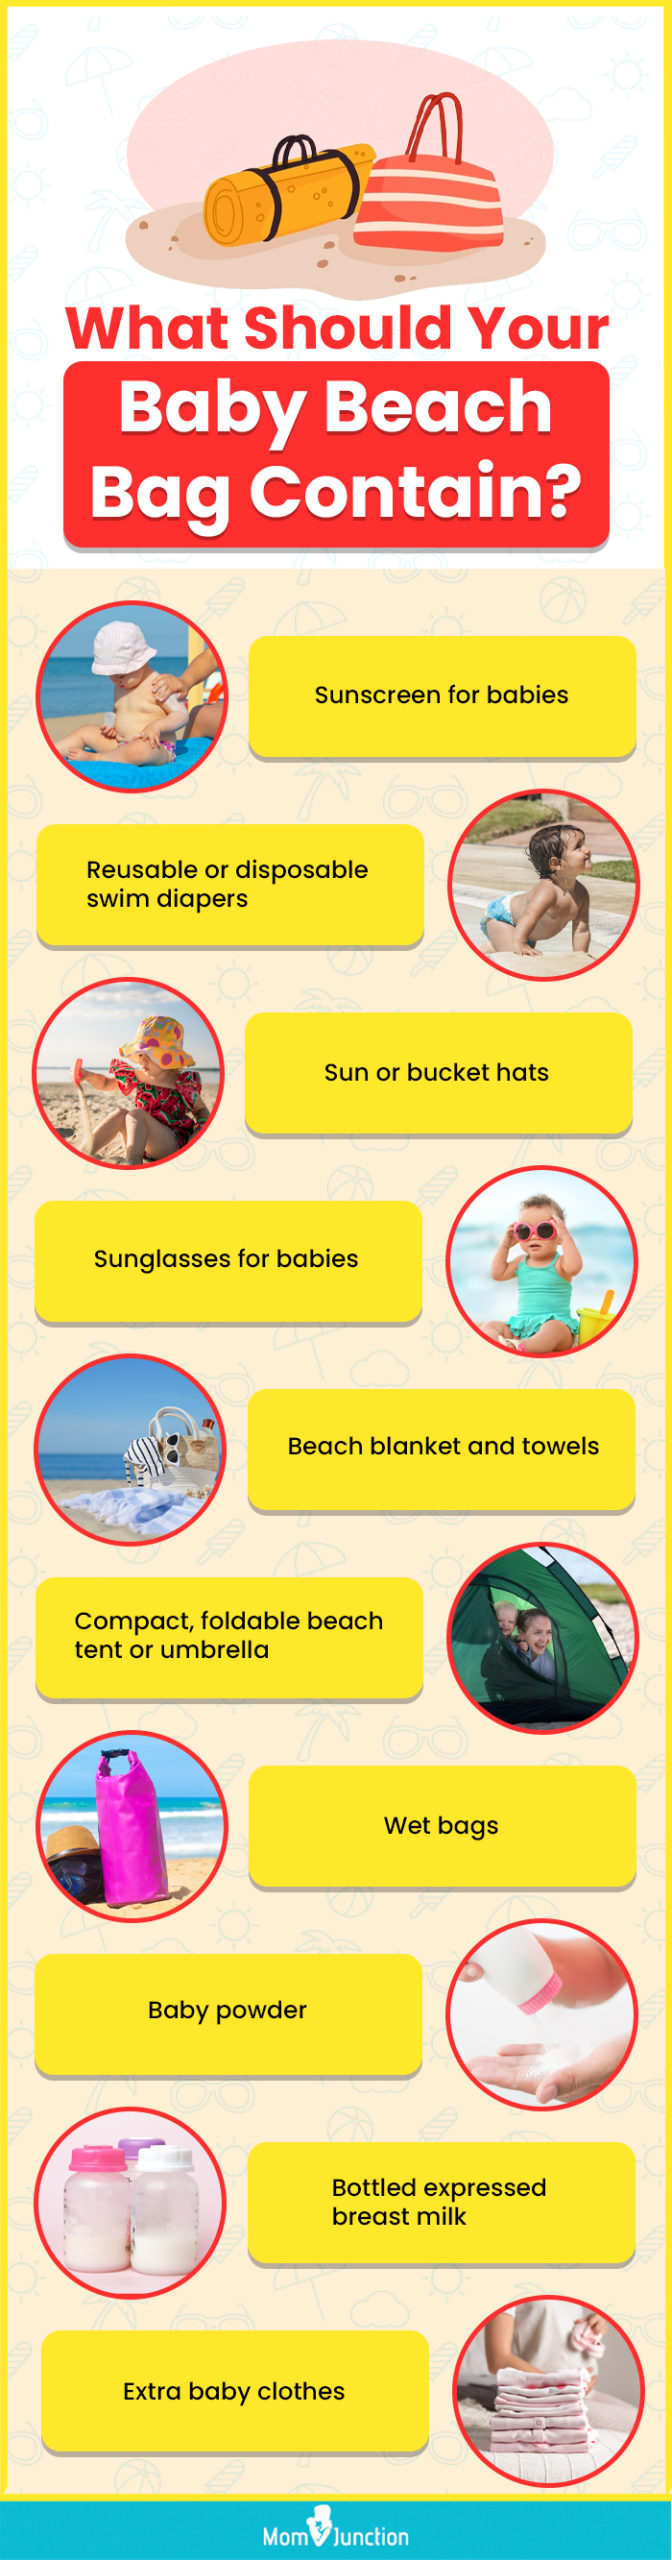 What Should Your Baby Beach Bag Contain (infographic)